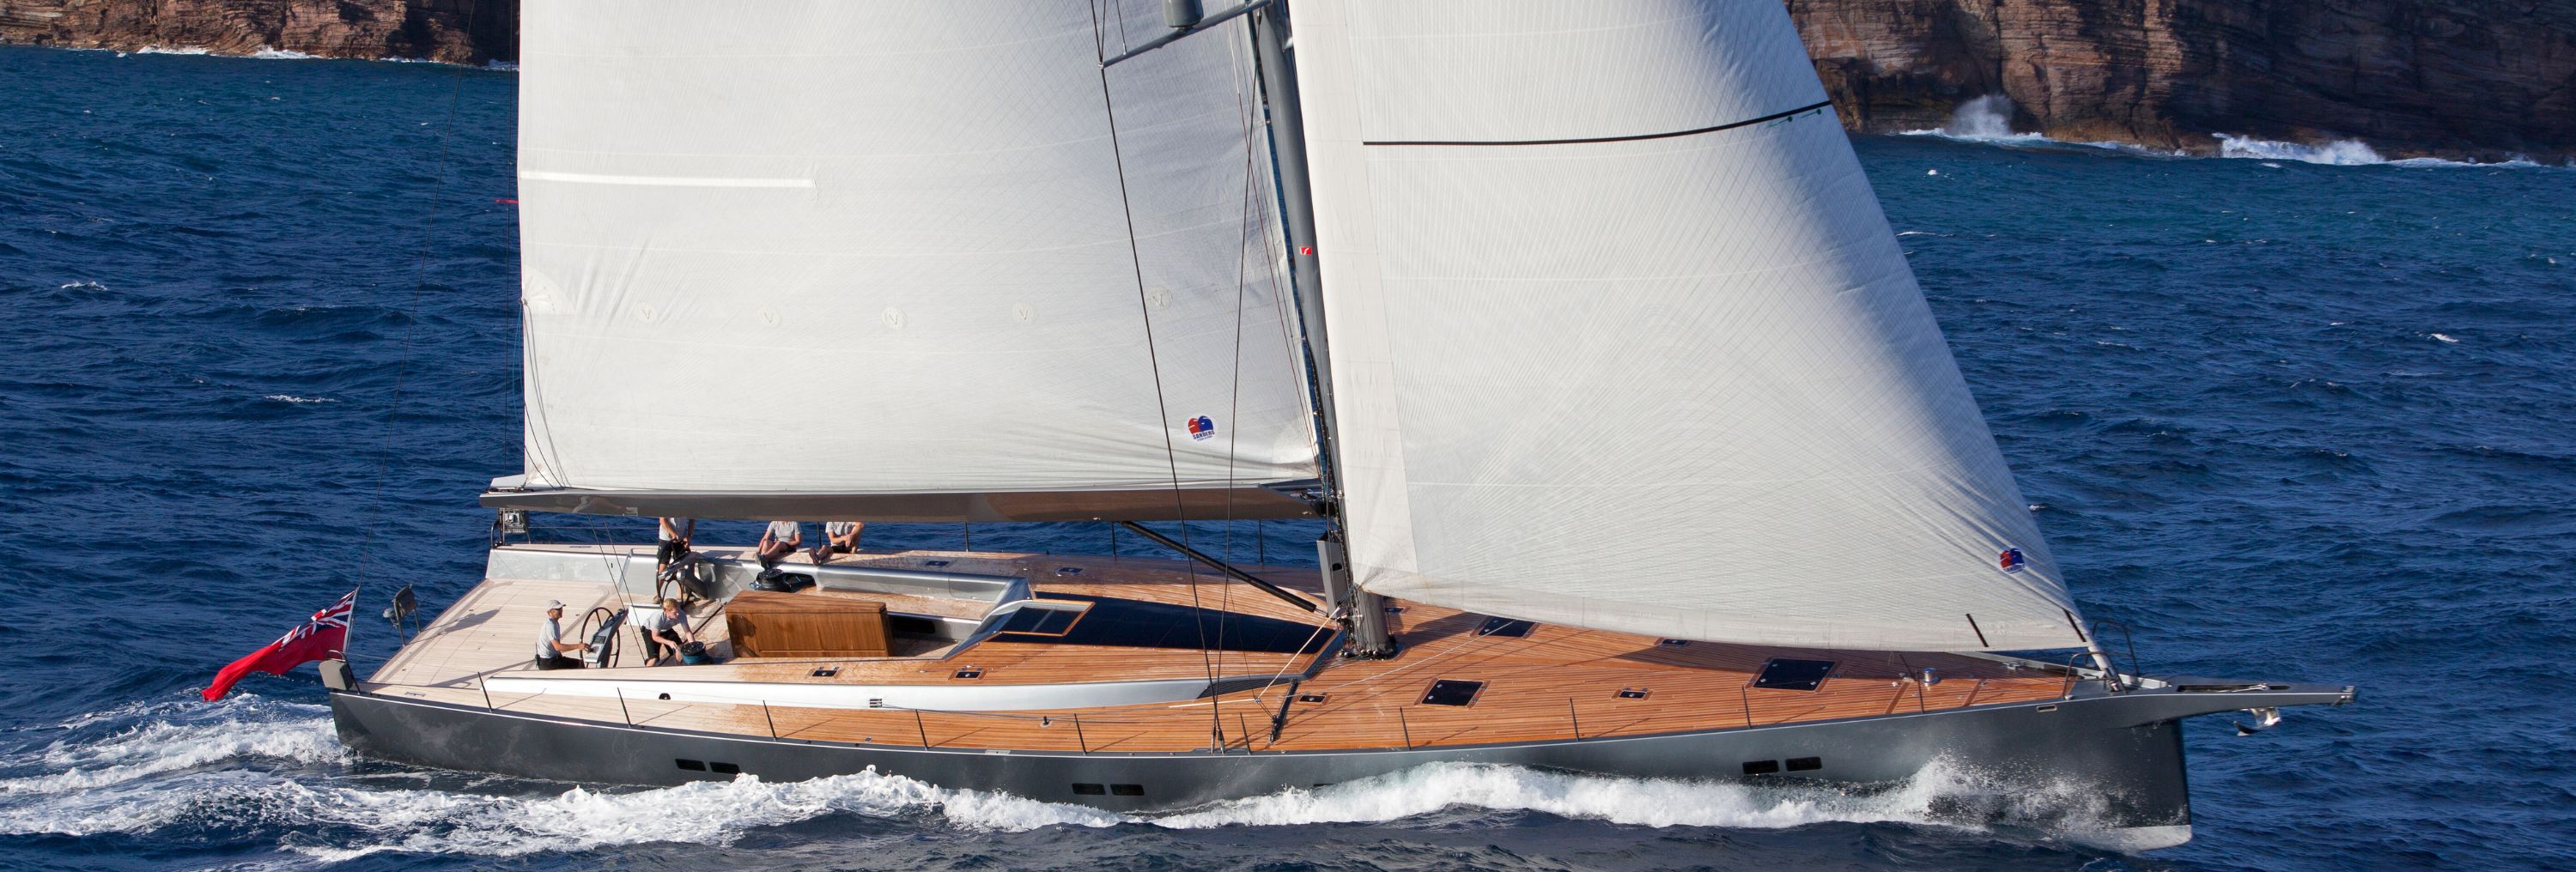 AEGIR: Available for Charter in Spain